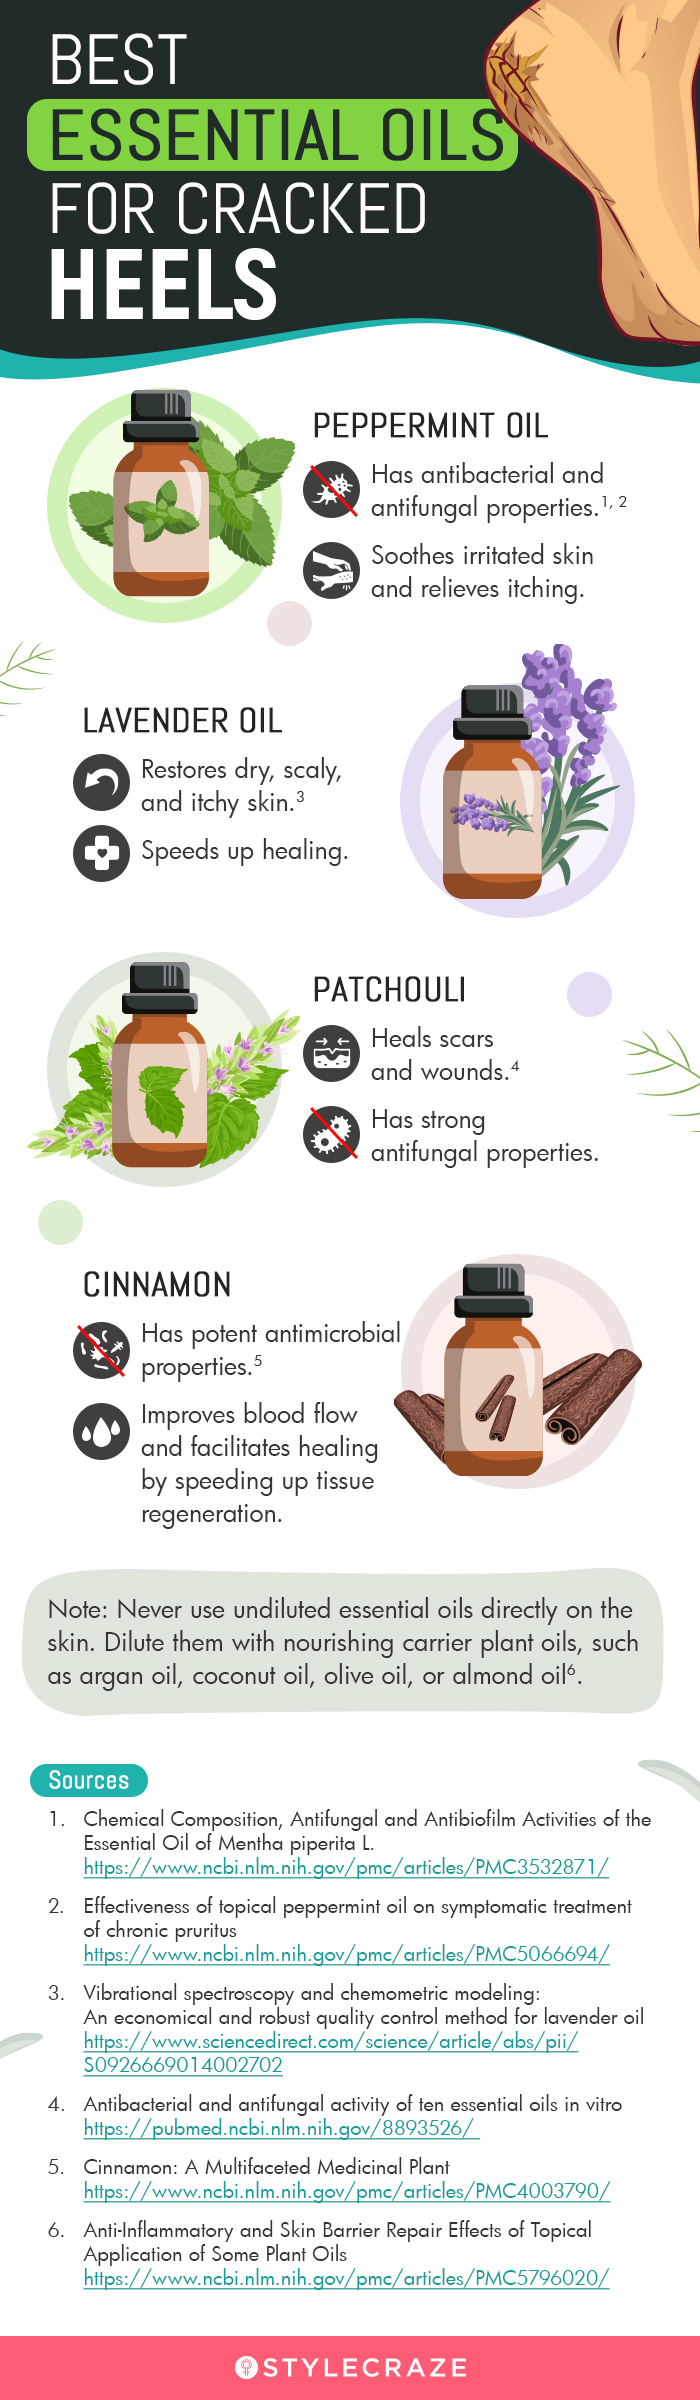 essential oils for cracked heels (infographic)